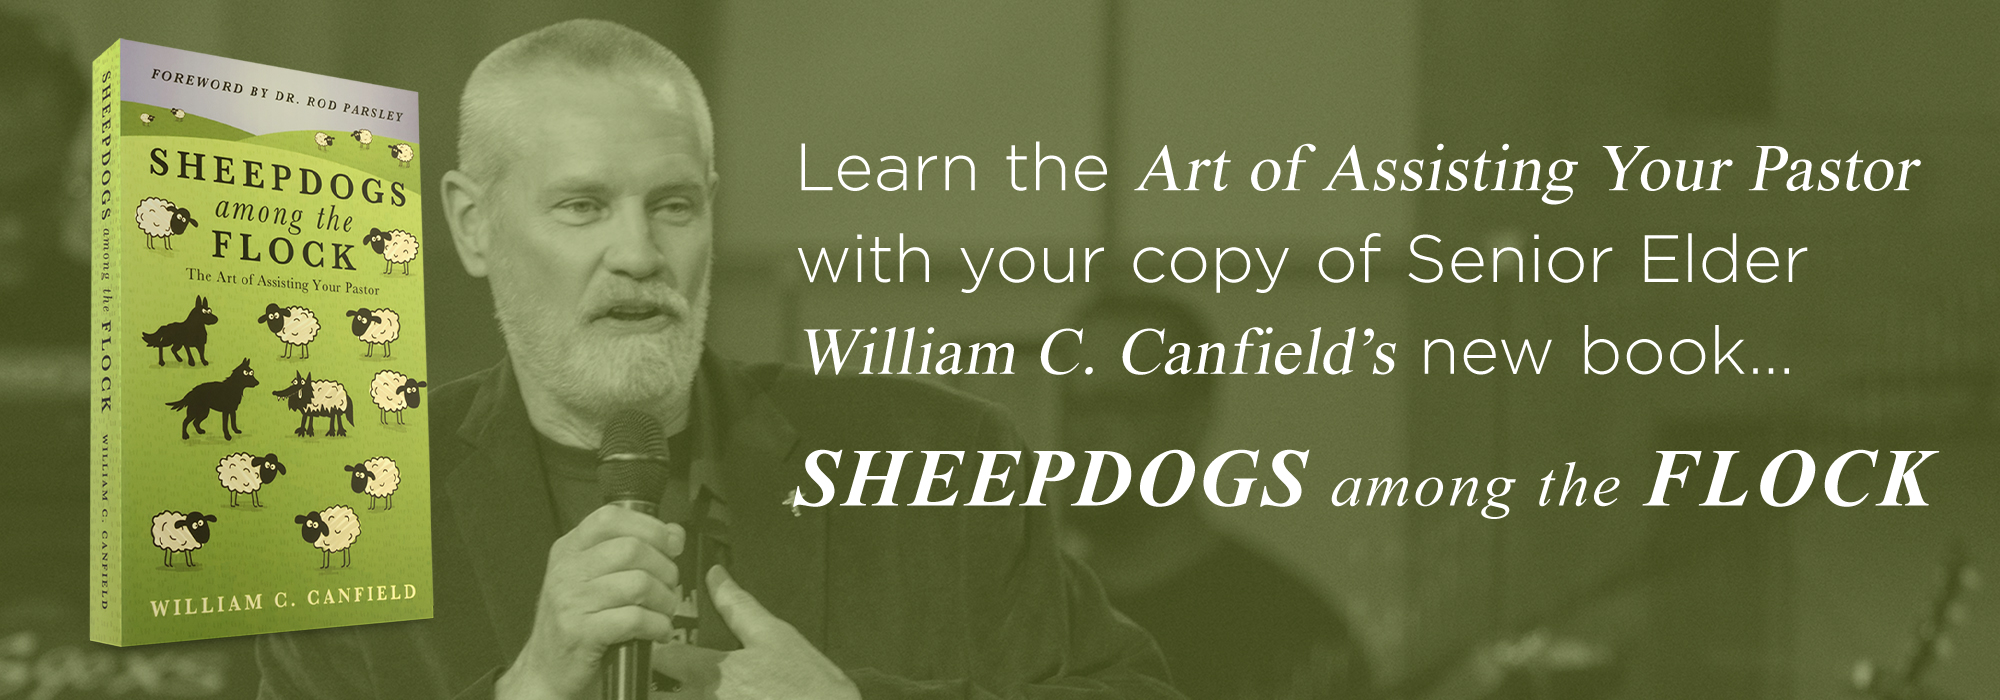 Sheepdogs Among the Flock by William C. Canfield